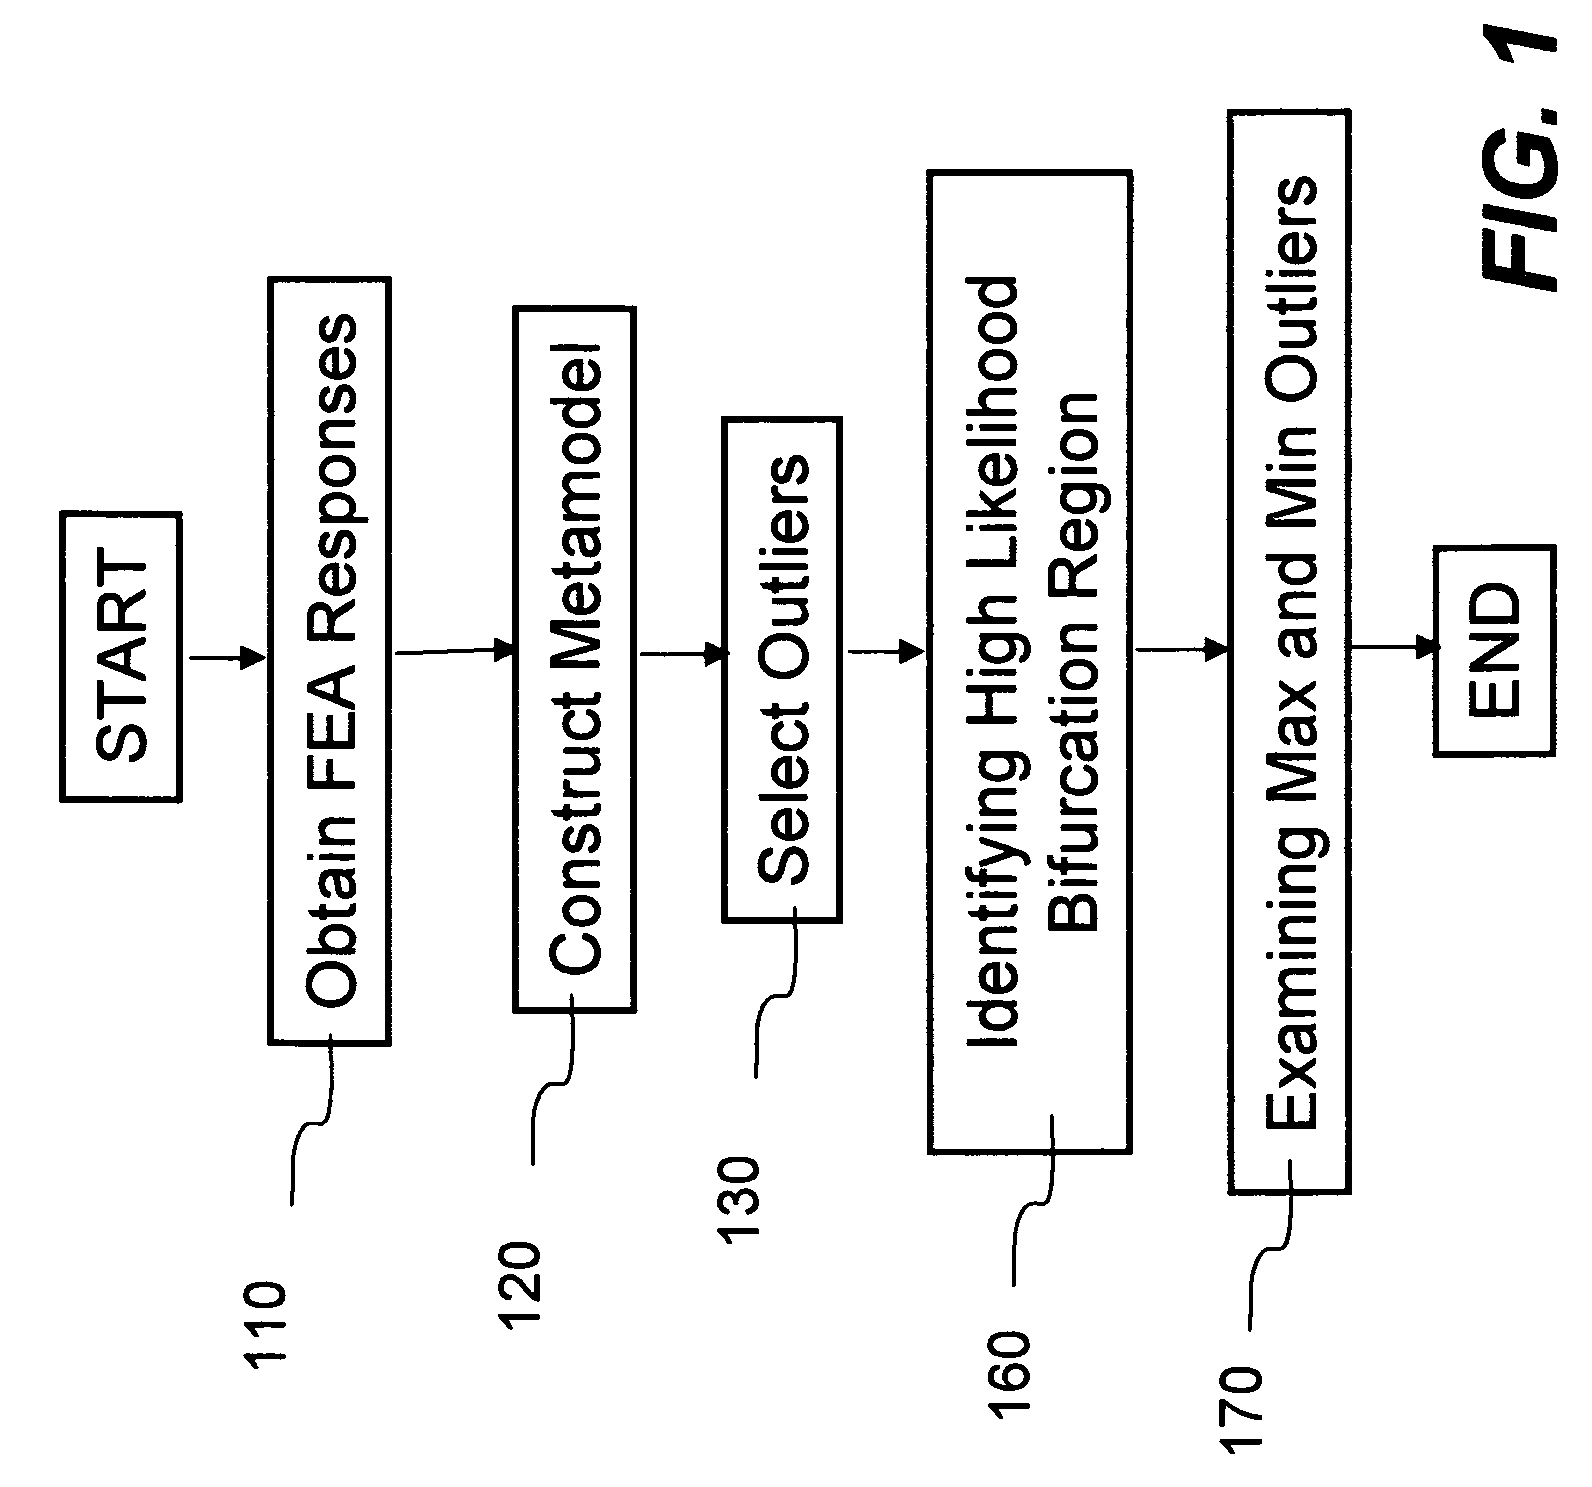 Method and system for distinguishing effects due to bifurcation from effects due to design variable changes in finite element analysis